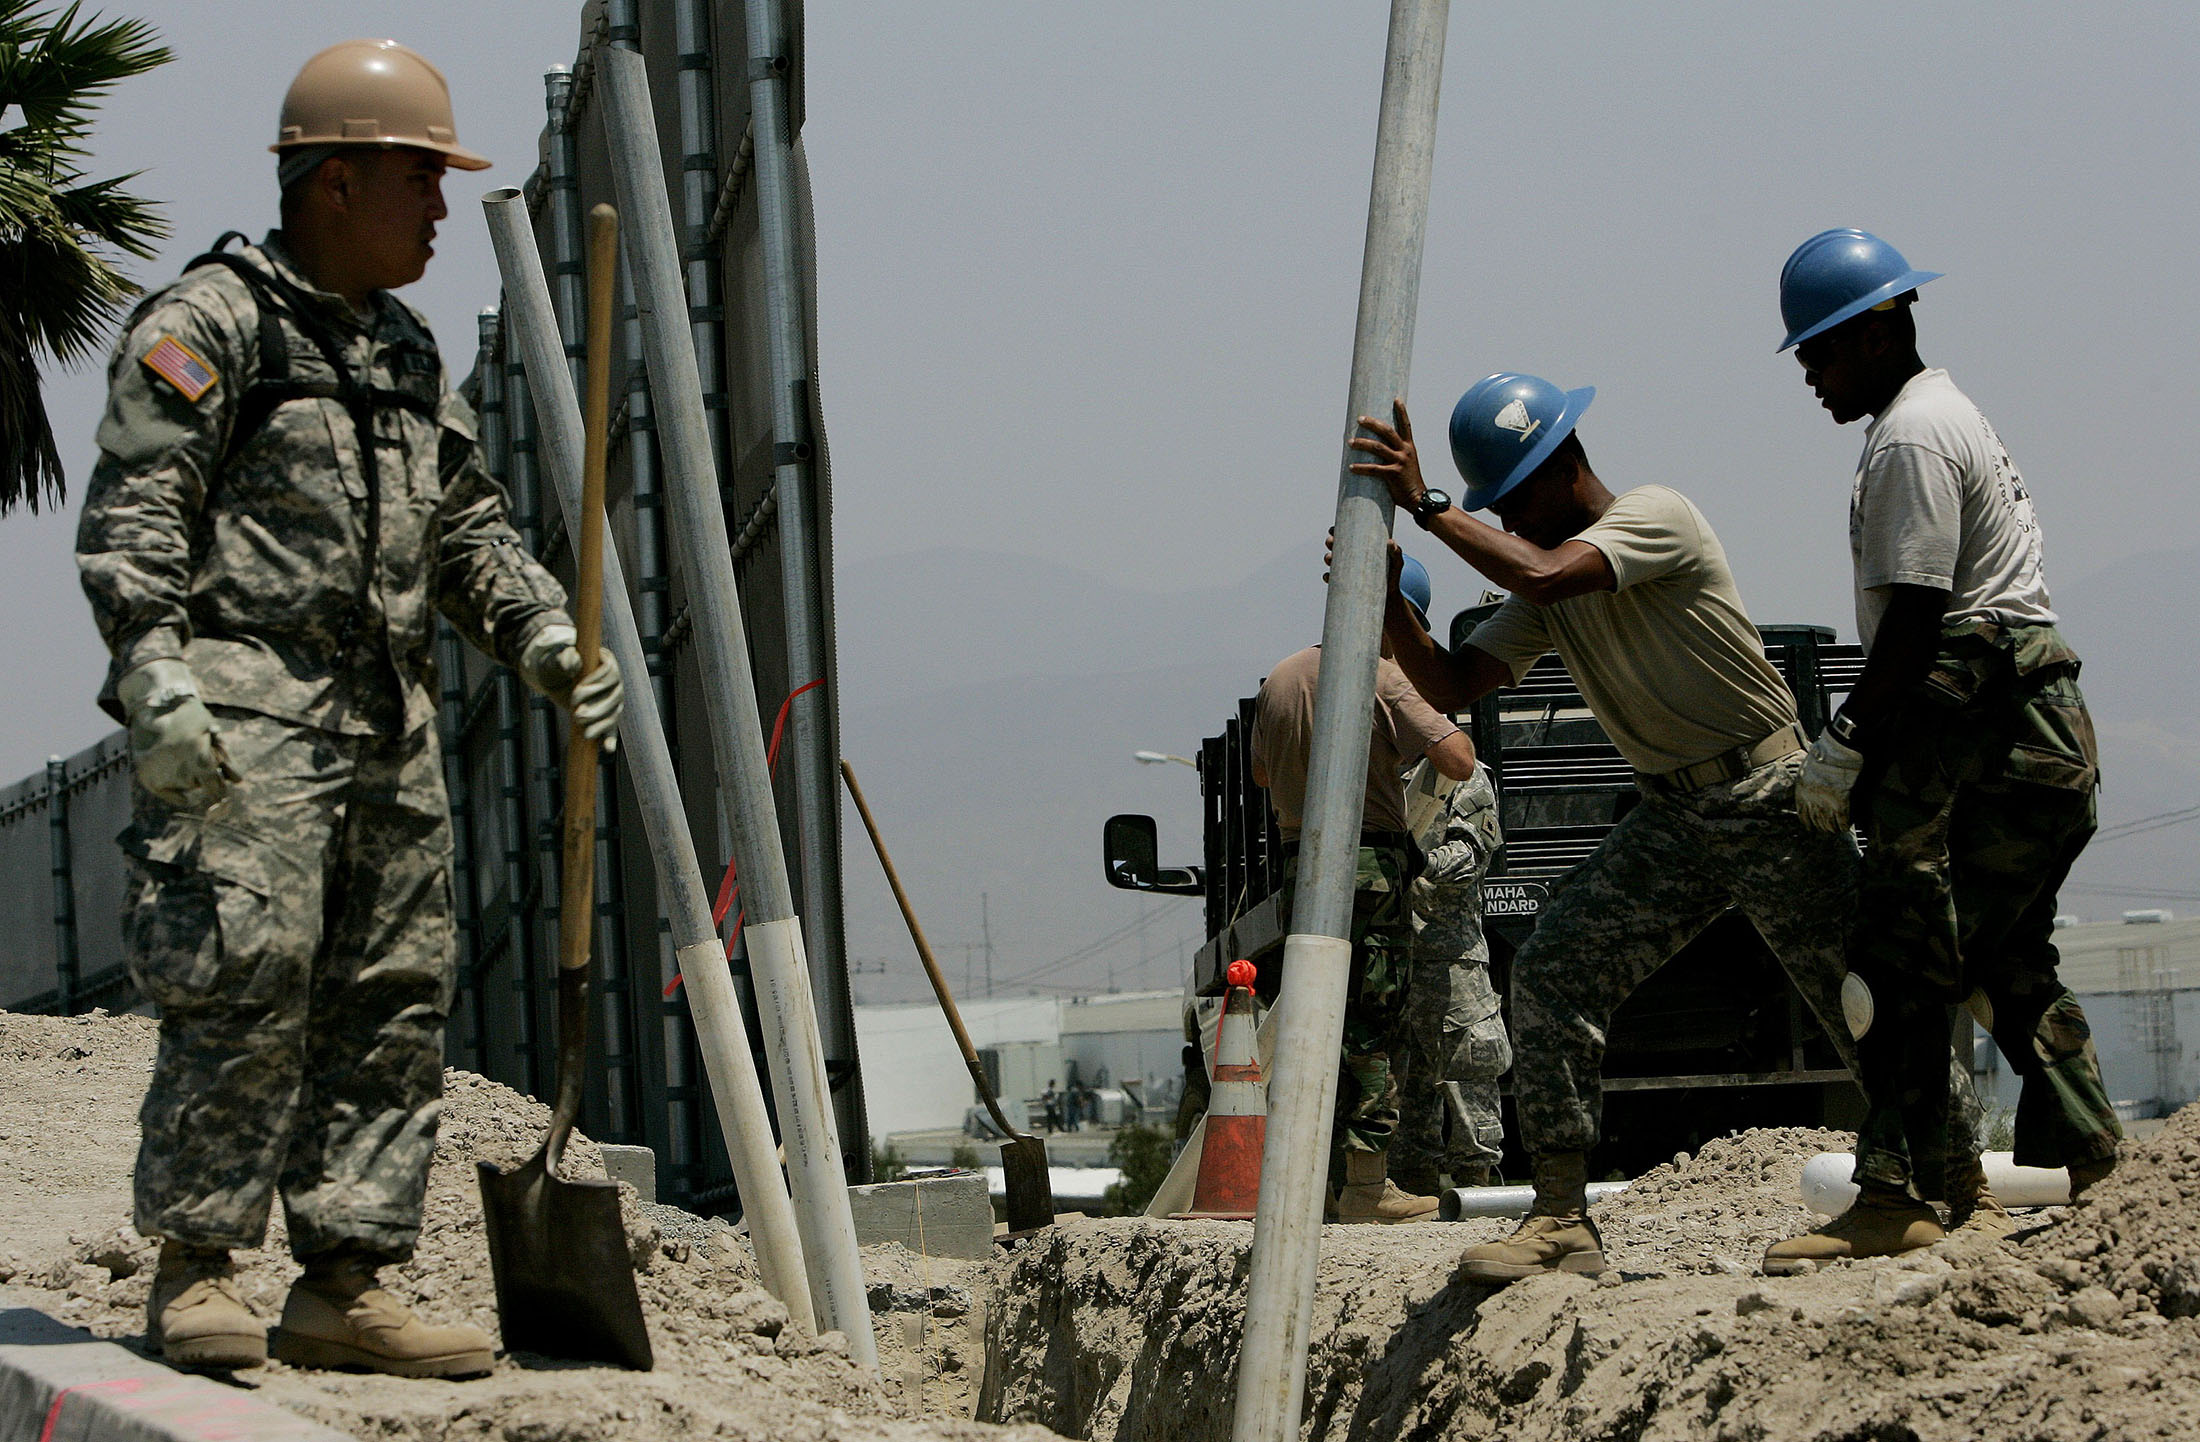 OTAY MESA, CA - JULY 25:  Members of the California National Guard prepare to bury plastic pipes for housing electrical wiring along the U.S.-Mexico Border July 25, 2006 in Otay Mesa, California. Approximately 1,000 volunteer Guardsmen are stationed along the California-Mexico border as part of Operation Jump Start, which is providing support for the border patrol agents by repairing fences, improving roads and manning surveillance cameras. The Guard are prohibited from engaging in overt law enforcement.  (Photo by Sandy Huffaker/Getty Images)